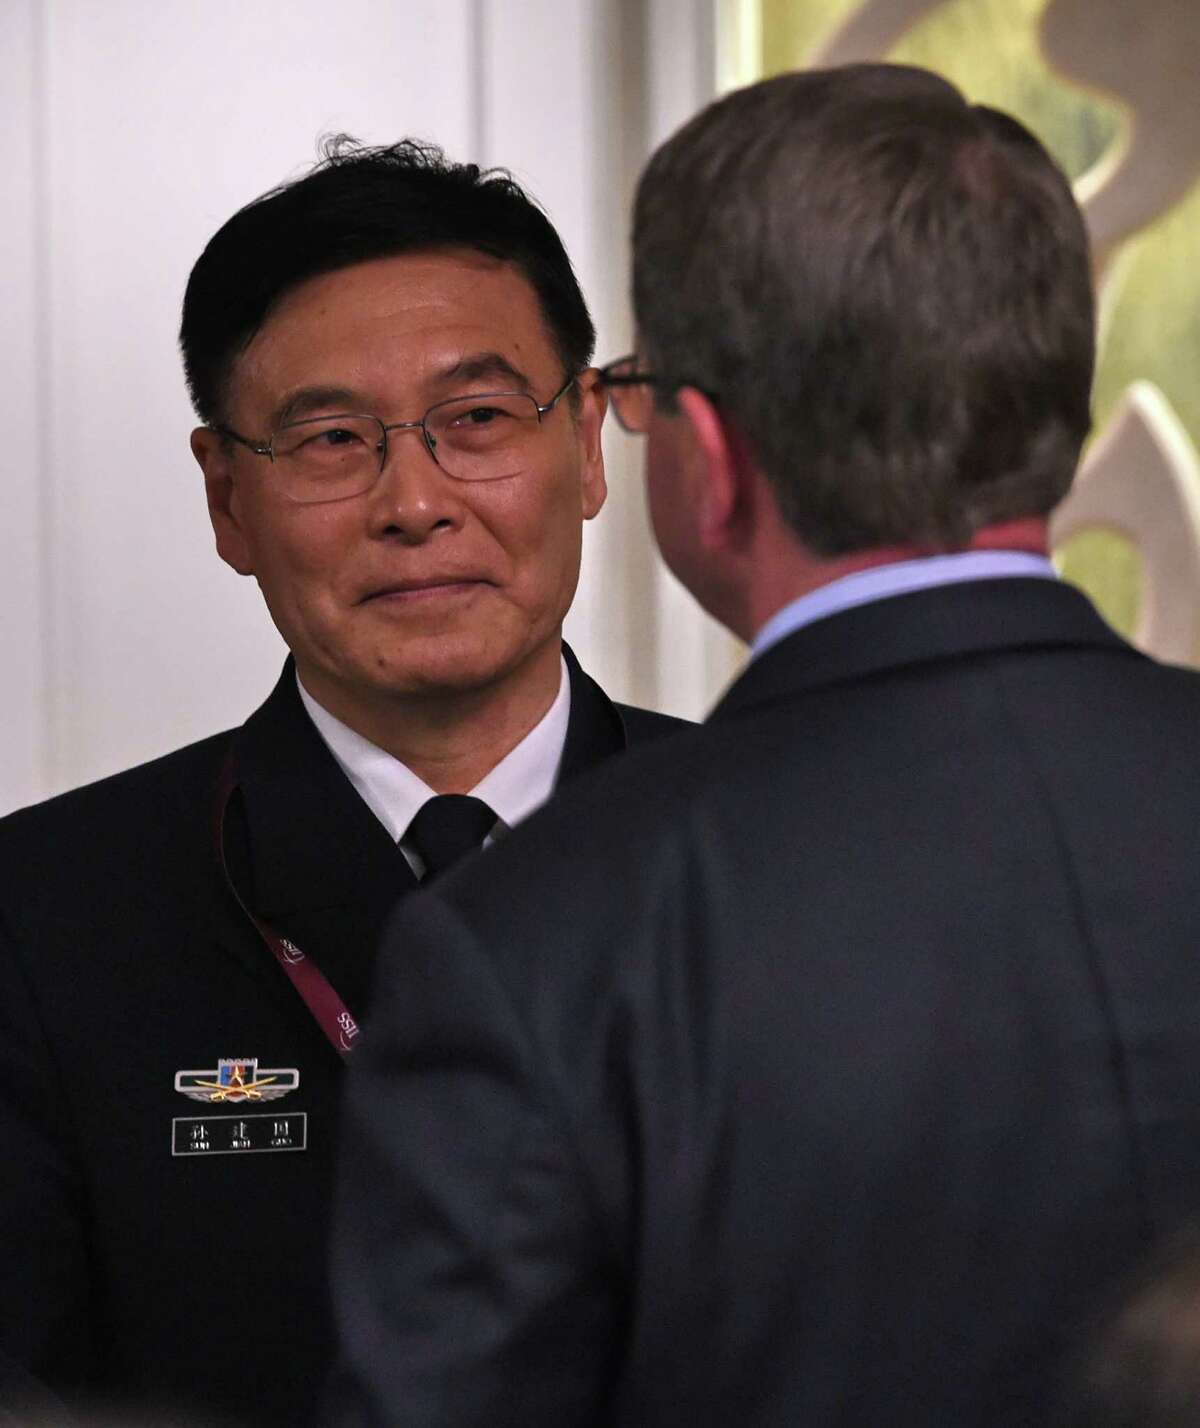 Sun Jianguo (L) from the Chinese People's Liberation Army Navy, chats with US Secretary of Defense Ashton Carter (face back) during the ministerial luncheon at the 14th Asia Security Summit, the International Institute for Strategic Studies (IISS) Shangri-La Dialogue 2015 in Singapore on May 30, 2015. The United States on May 30 called for an "immediate and lasting halt" to reclamation works in disputed waters in the South China Sea, saying Beijing's behaviour in the area was "out of step" with international norms. AFP PHOTO / ROSLAN RAHMANROSLAN RAHMAN/AFP/Getty Images